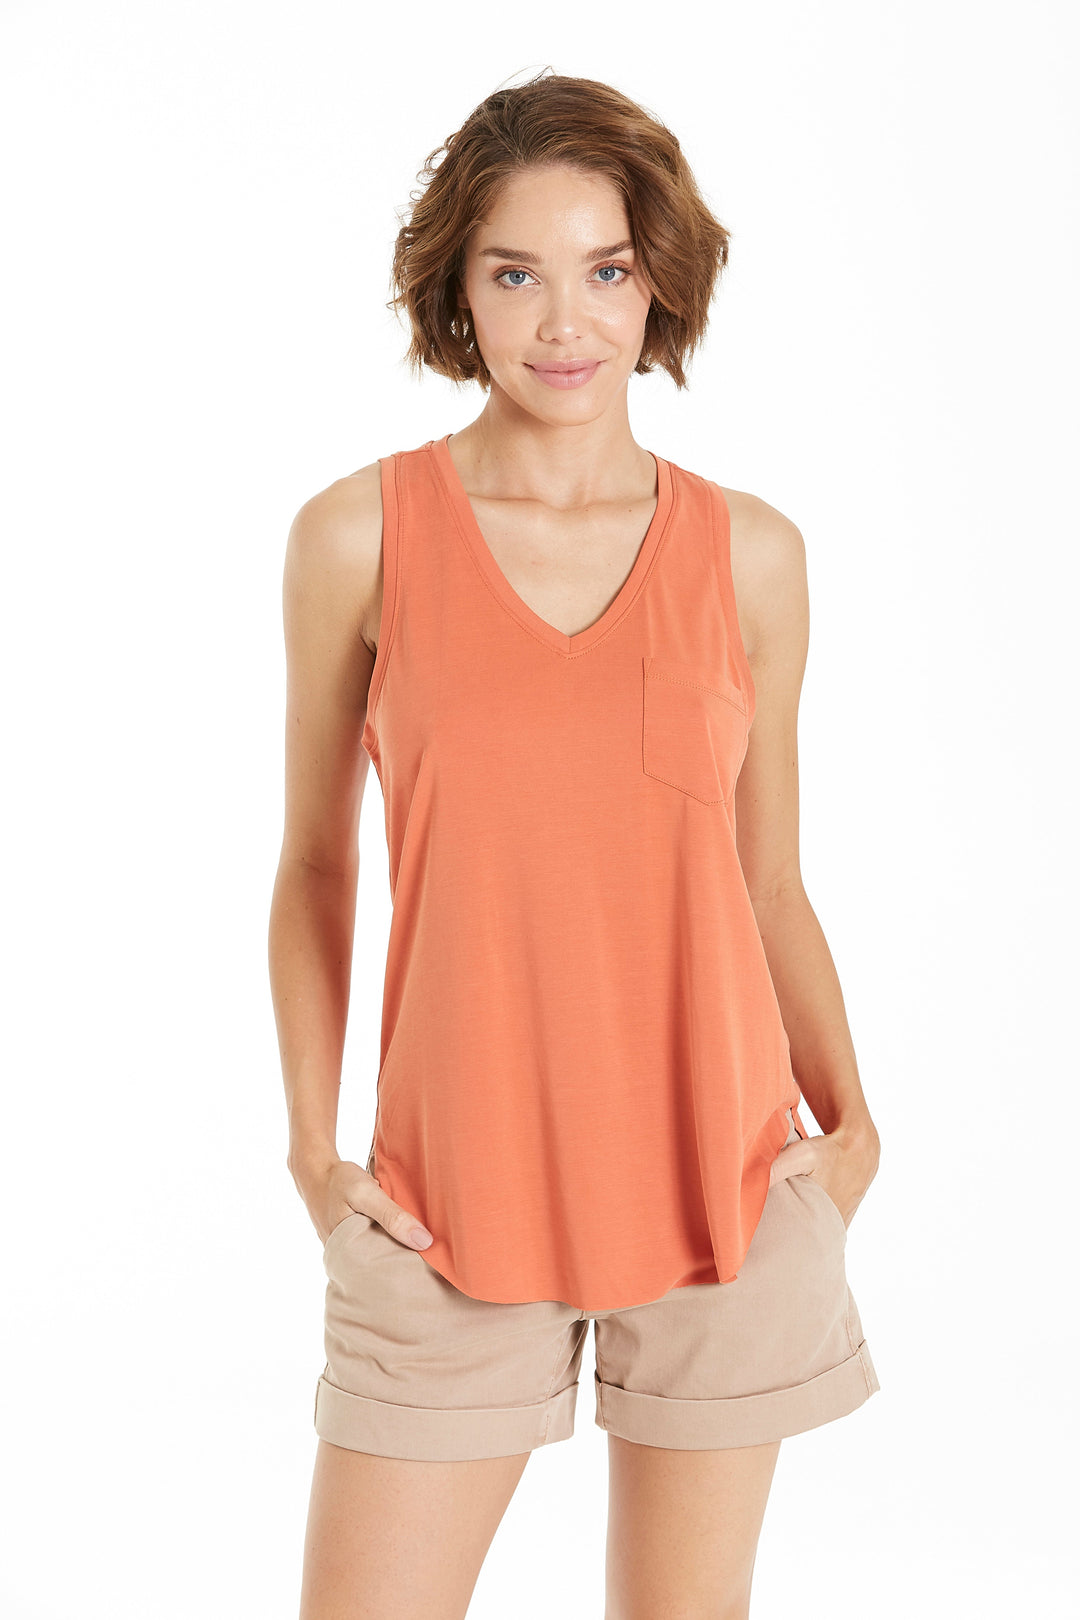 image of a female model wearing a ESTHER POCKET TANK RUST TOPS